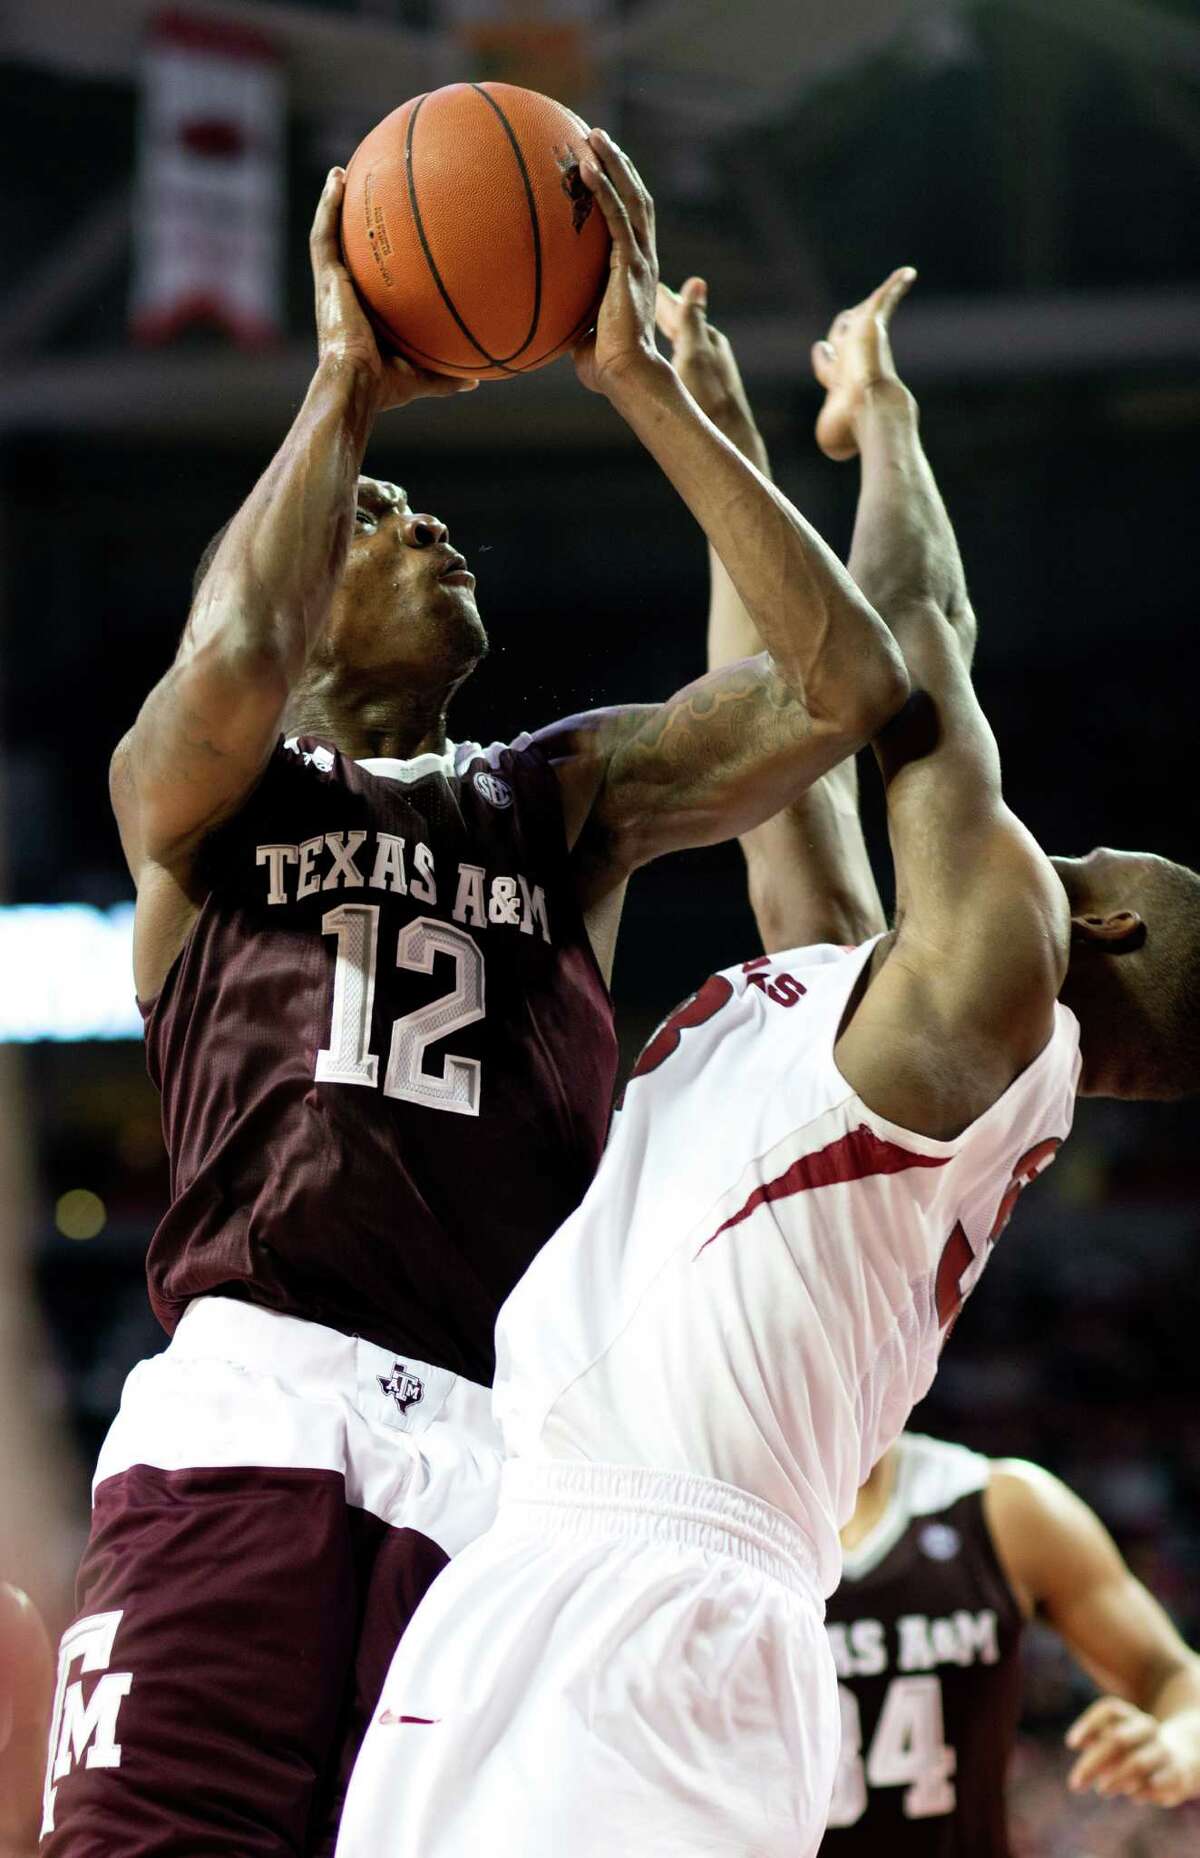 Texas A&M’s Jalen Jones is fouled by Arkansas’ Moses Kingsley (right) in the second half in Fayetteville, Ark., on Jan. 27, 2016.